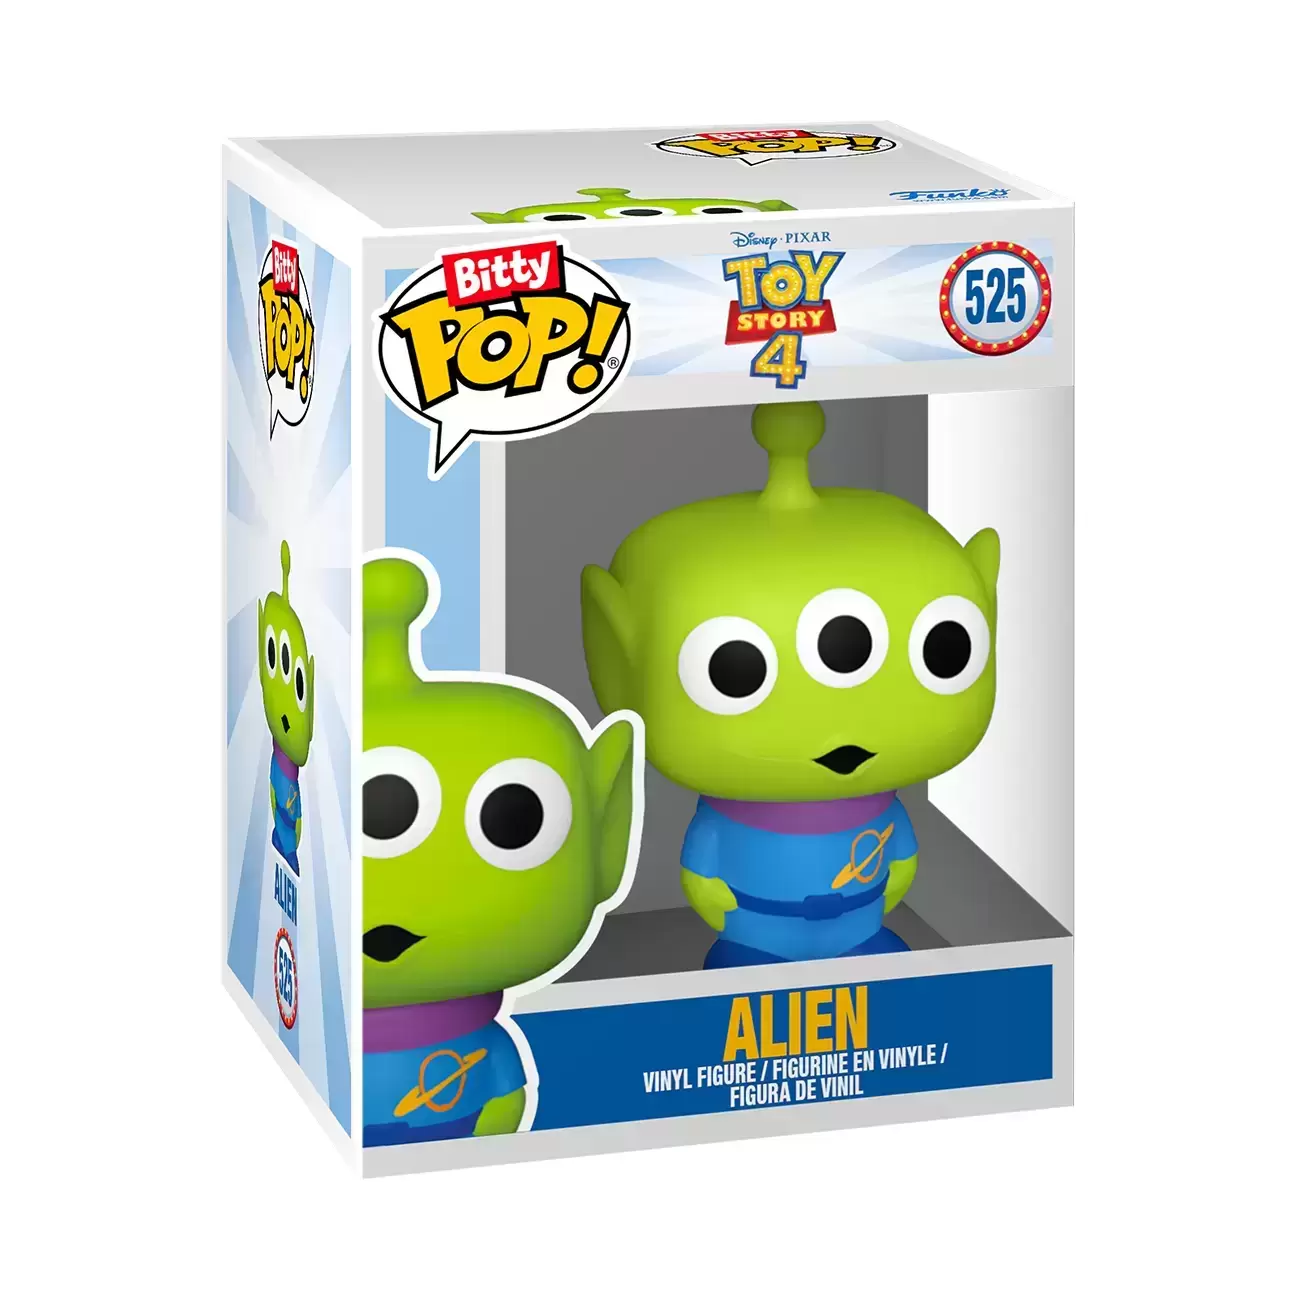 Toy Story Alien Figure, Collection Figurine